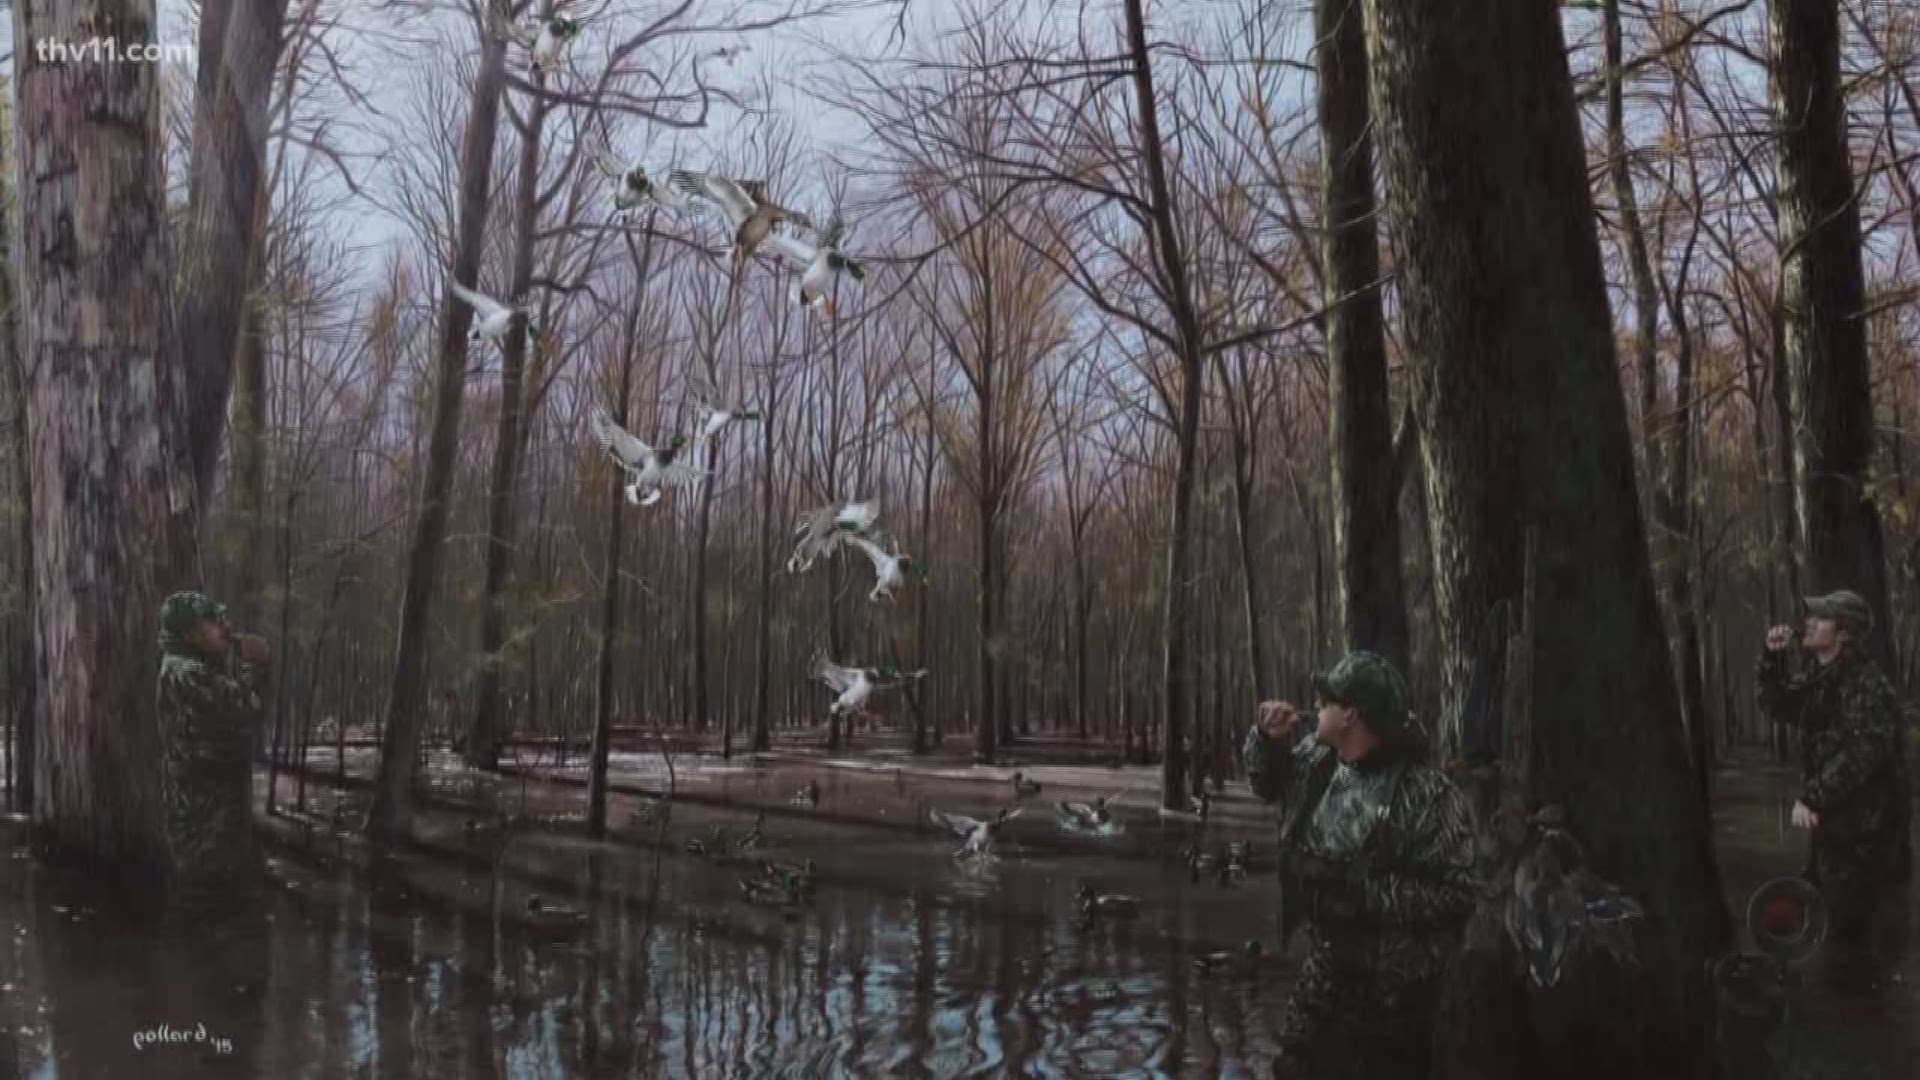 Glenn Pollard of Searcy has been making prints for Arkansas Ducks Unlimited for the last 20 years.